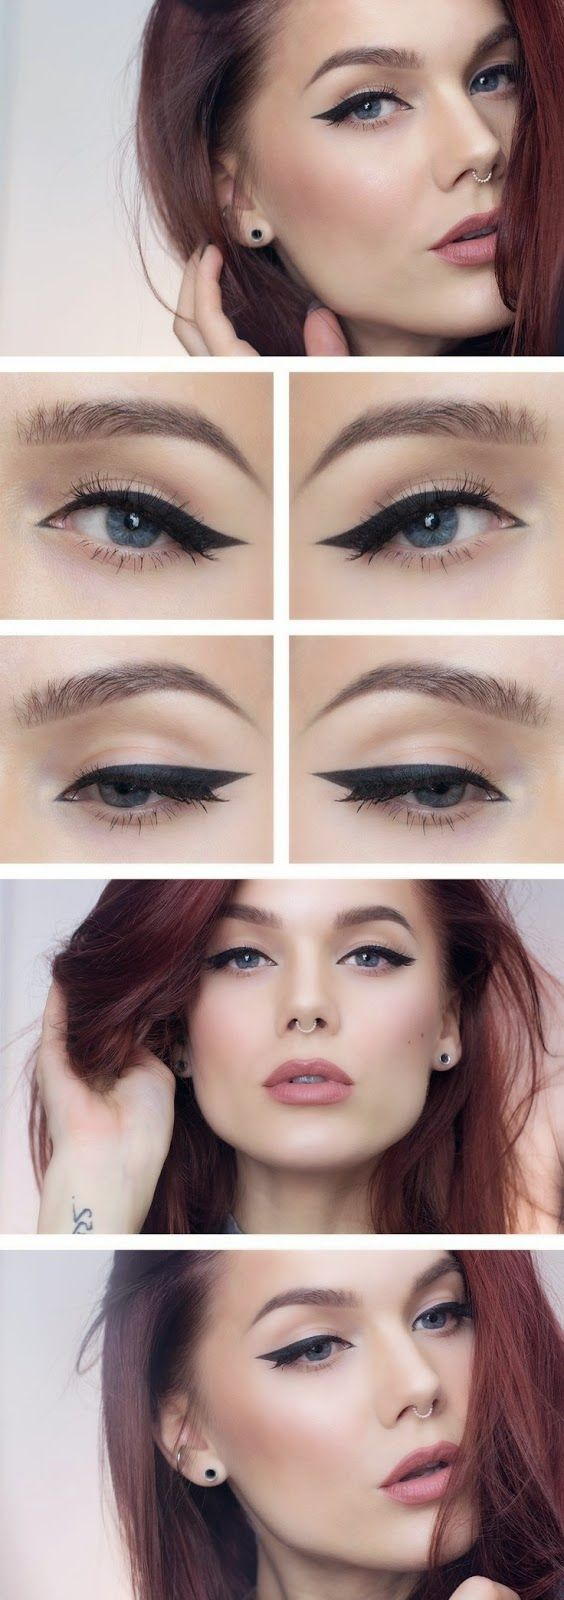 Eye Shapes For Makeup 15 Eye Makeup Tutorials You Want To Try For Office Looks Pretty